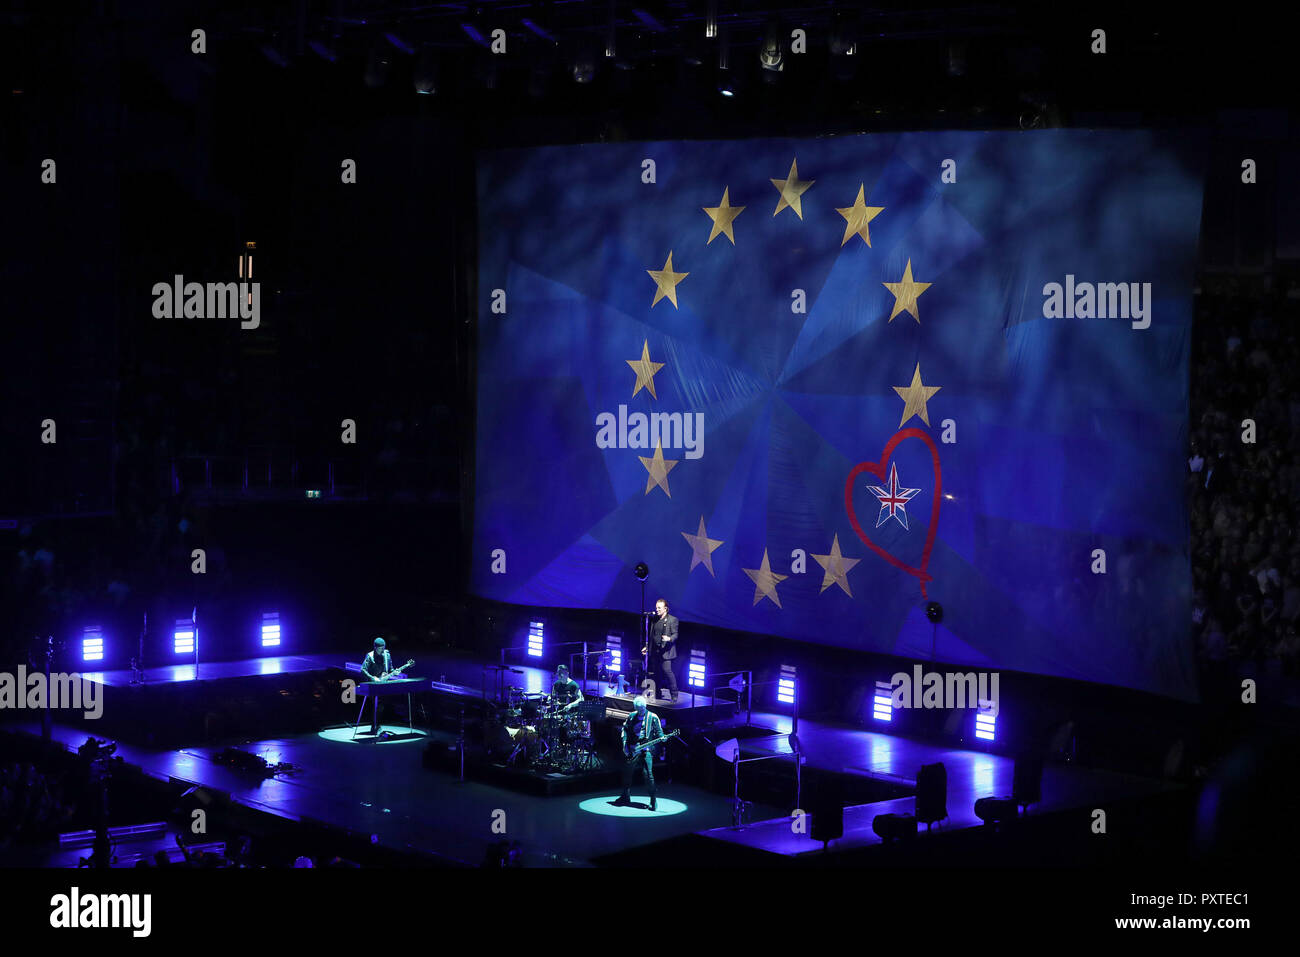 U2 perform in front of a giant EU flag, with one star as the Union Flag, at the o2 Arena in London, during their eXPERIENCE + iNNOCENCE Tour. Stock Photo